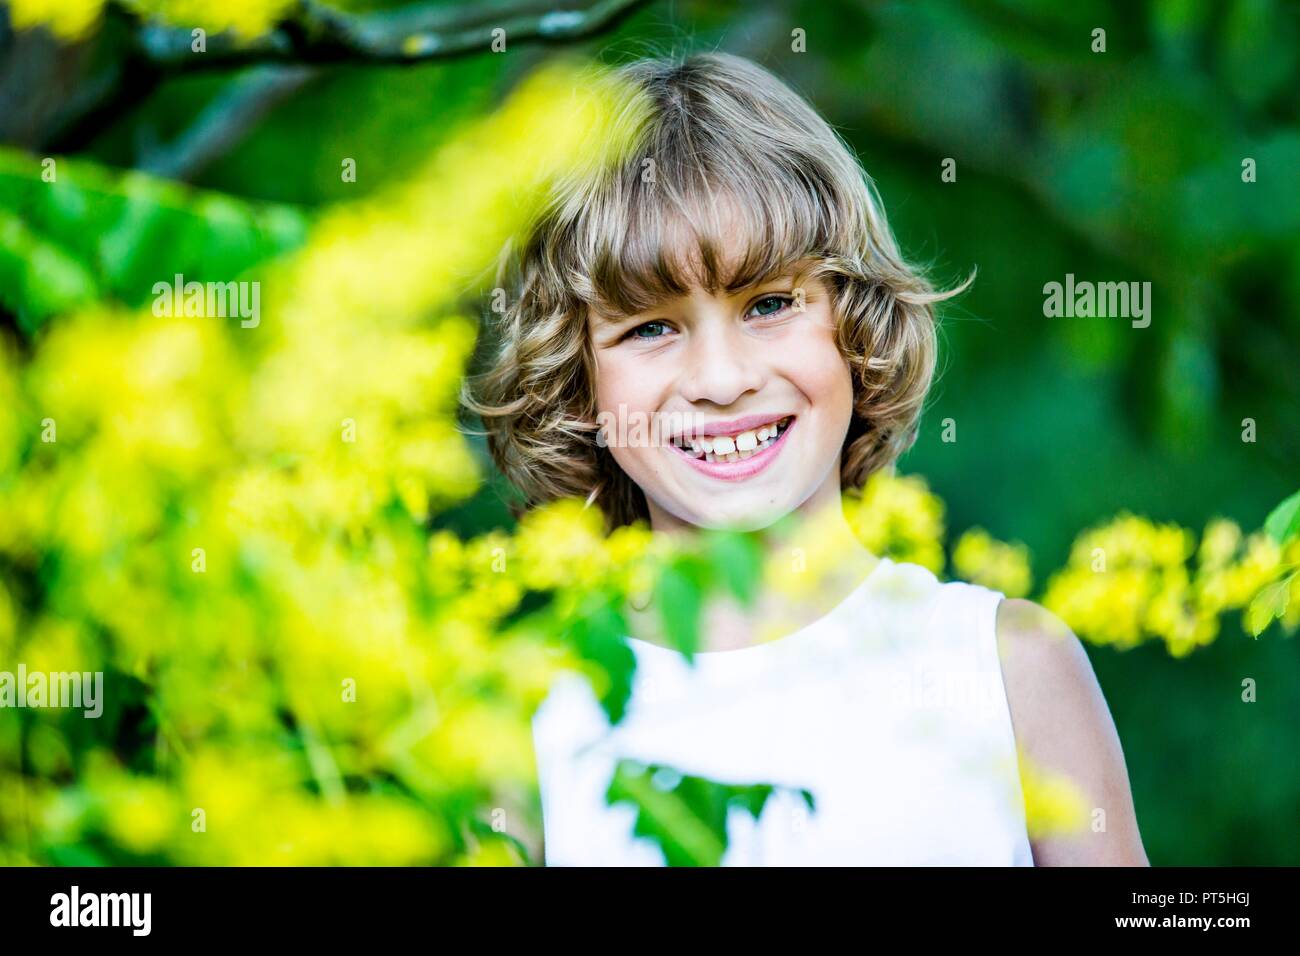 Portrait of young boy with yellow flowers in foreground, smiling. Stock Photo